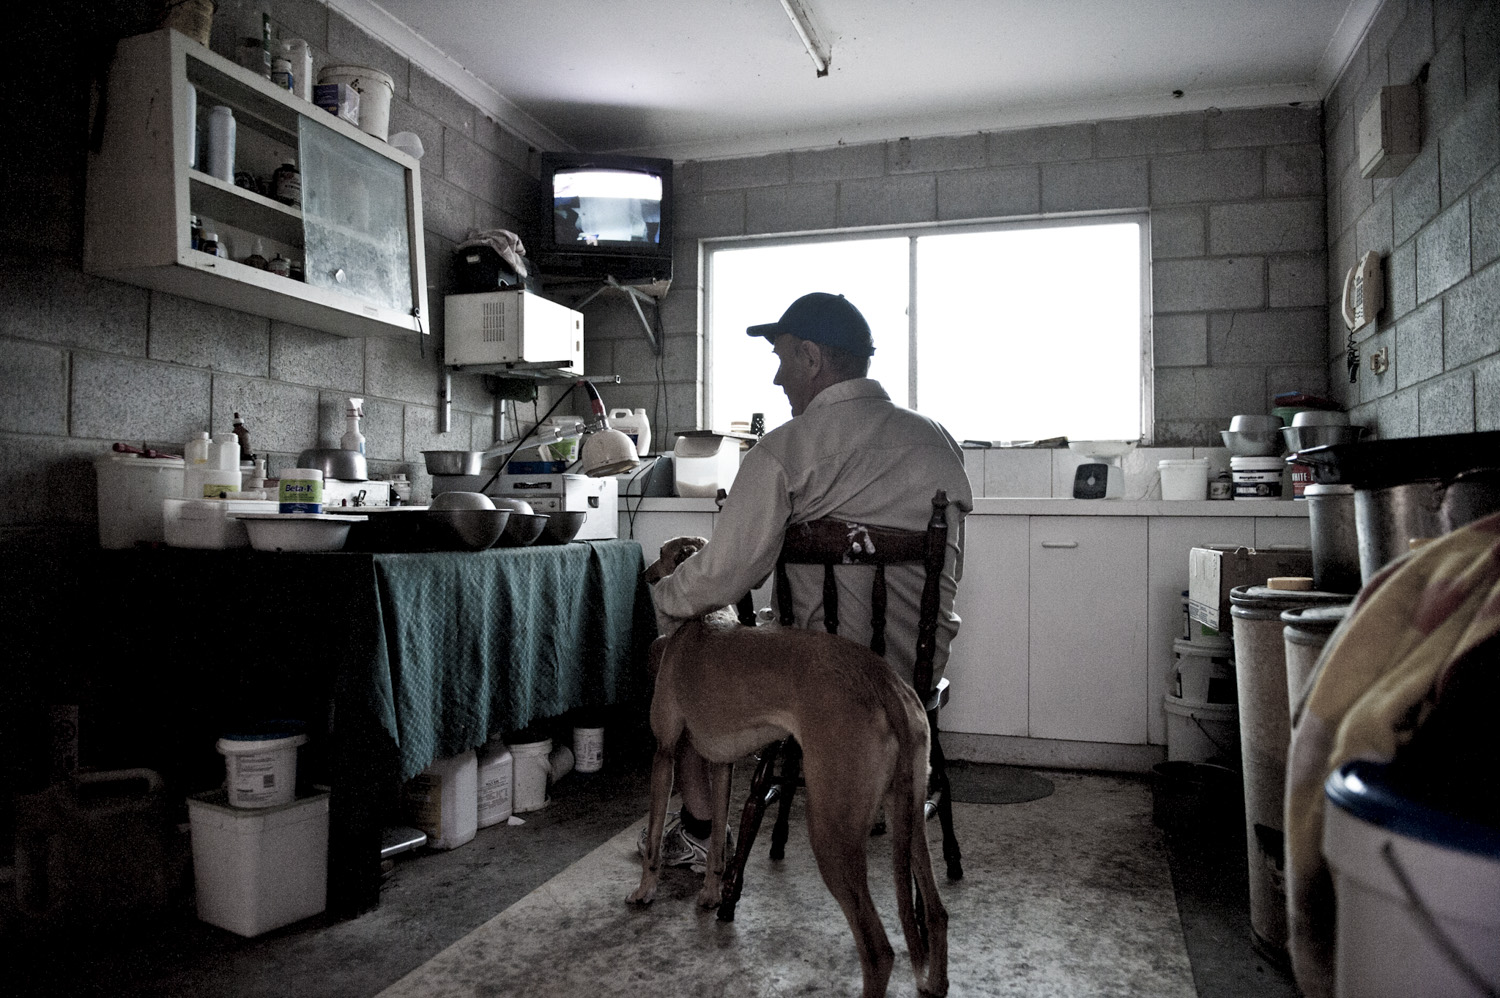 image of AARONTAIT COPYRIGHTED 2014 446 DOCUMENTARY PHOTOGRAPHER REPORTAGE LIFE SPORT DOGS GREYHOUND RACING STORY HUMAN DISHLICKER DISH LICKER MASTER